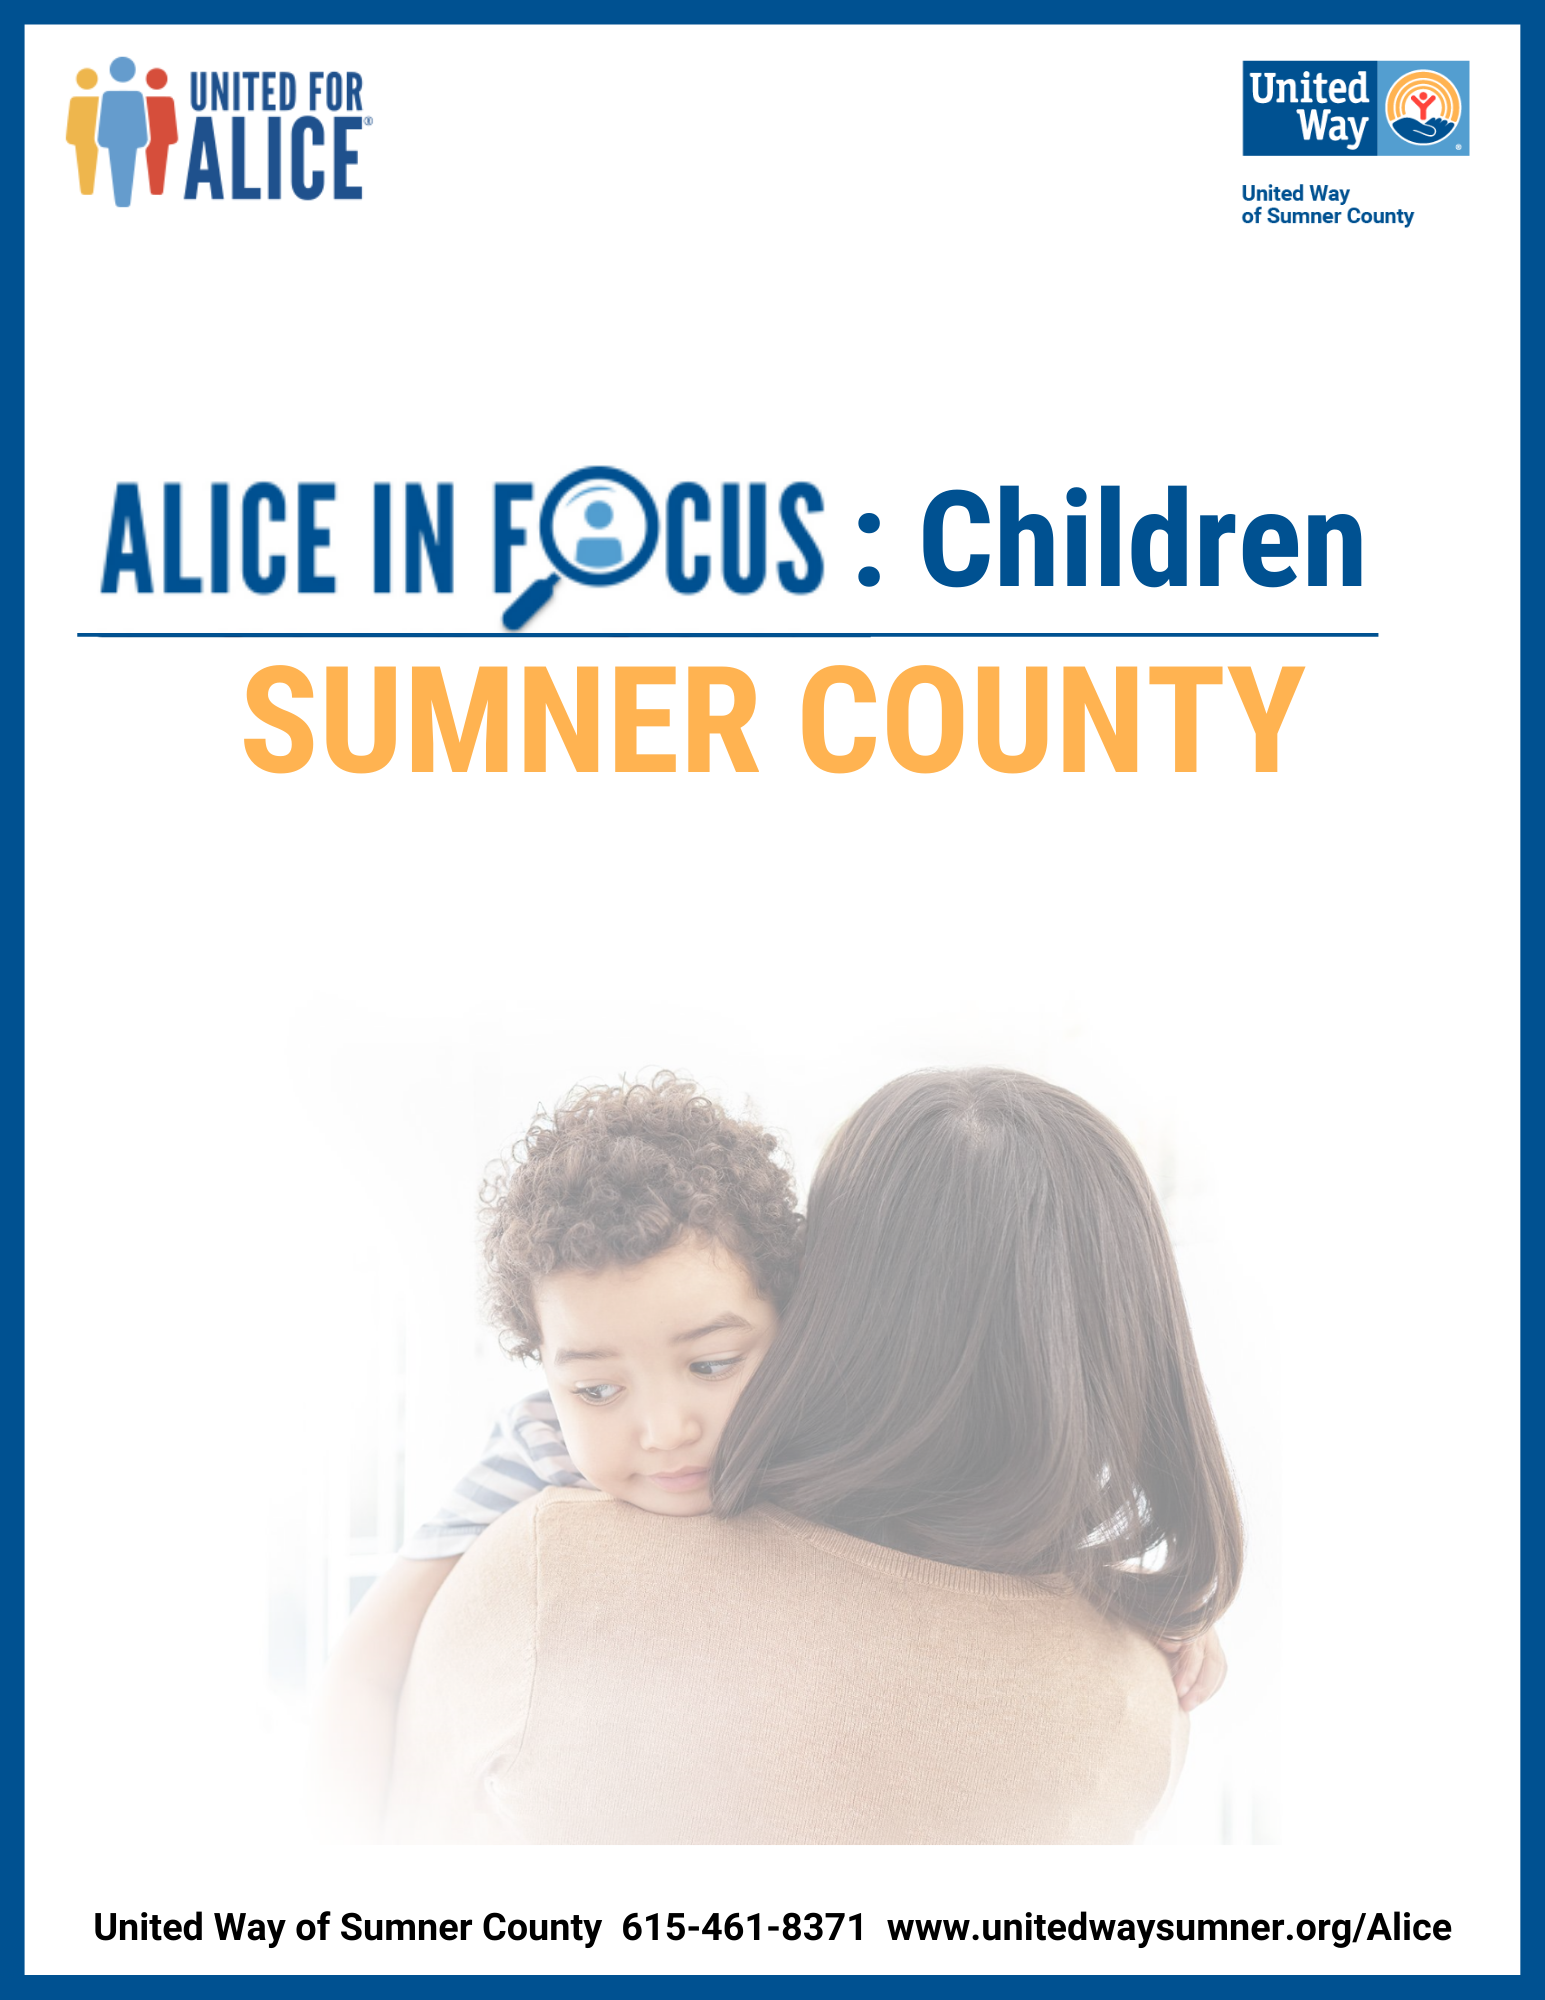 ALICE in Focus: Children Sumner County Summary Cover with border